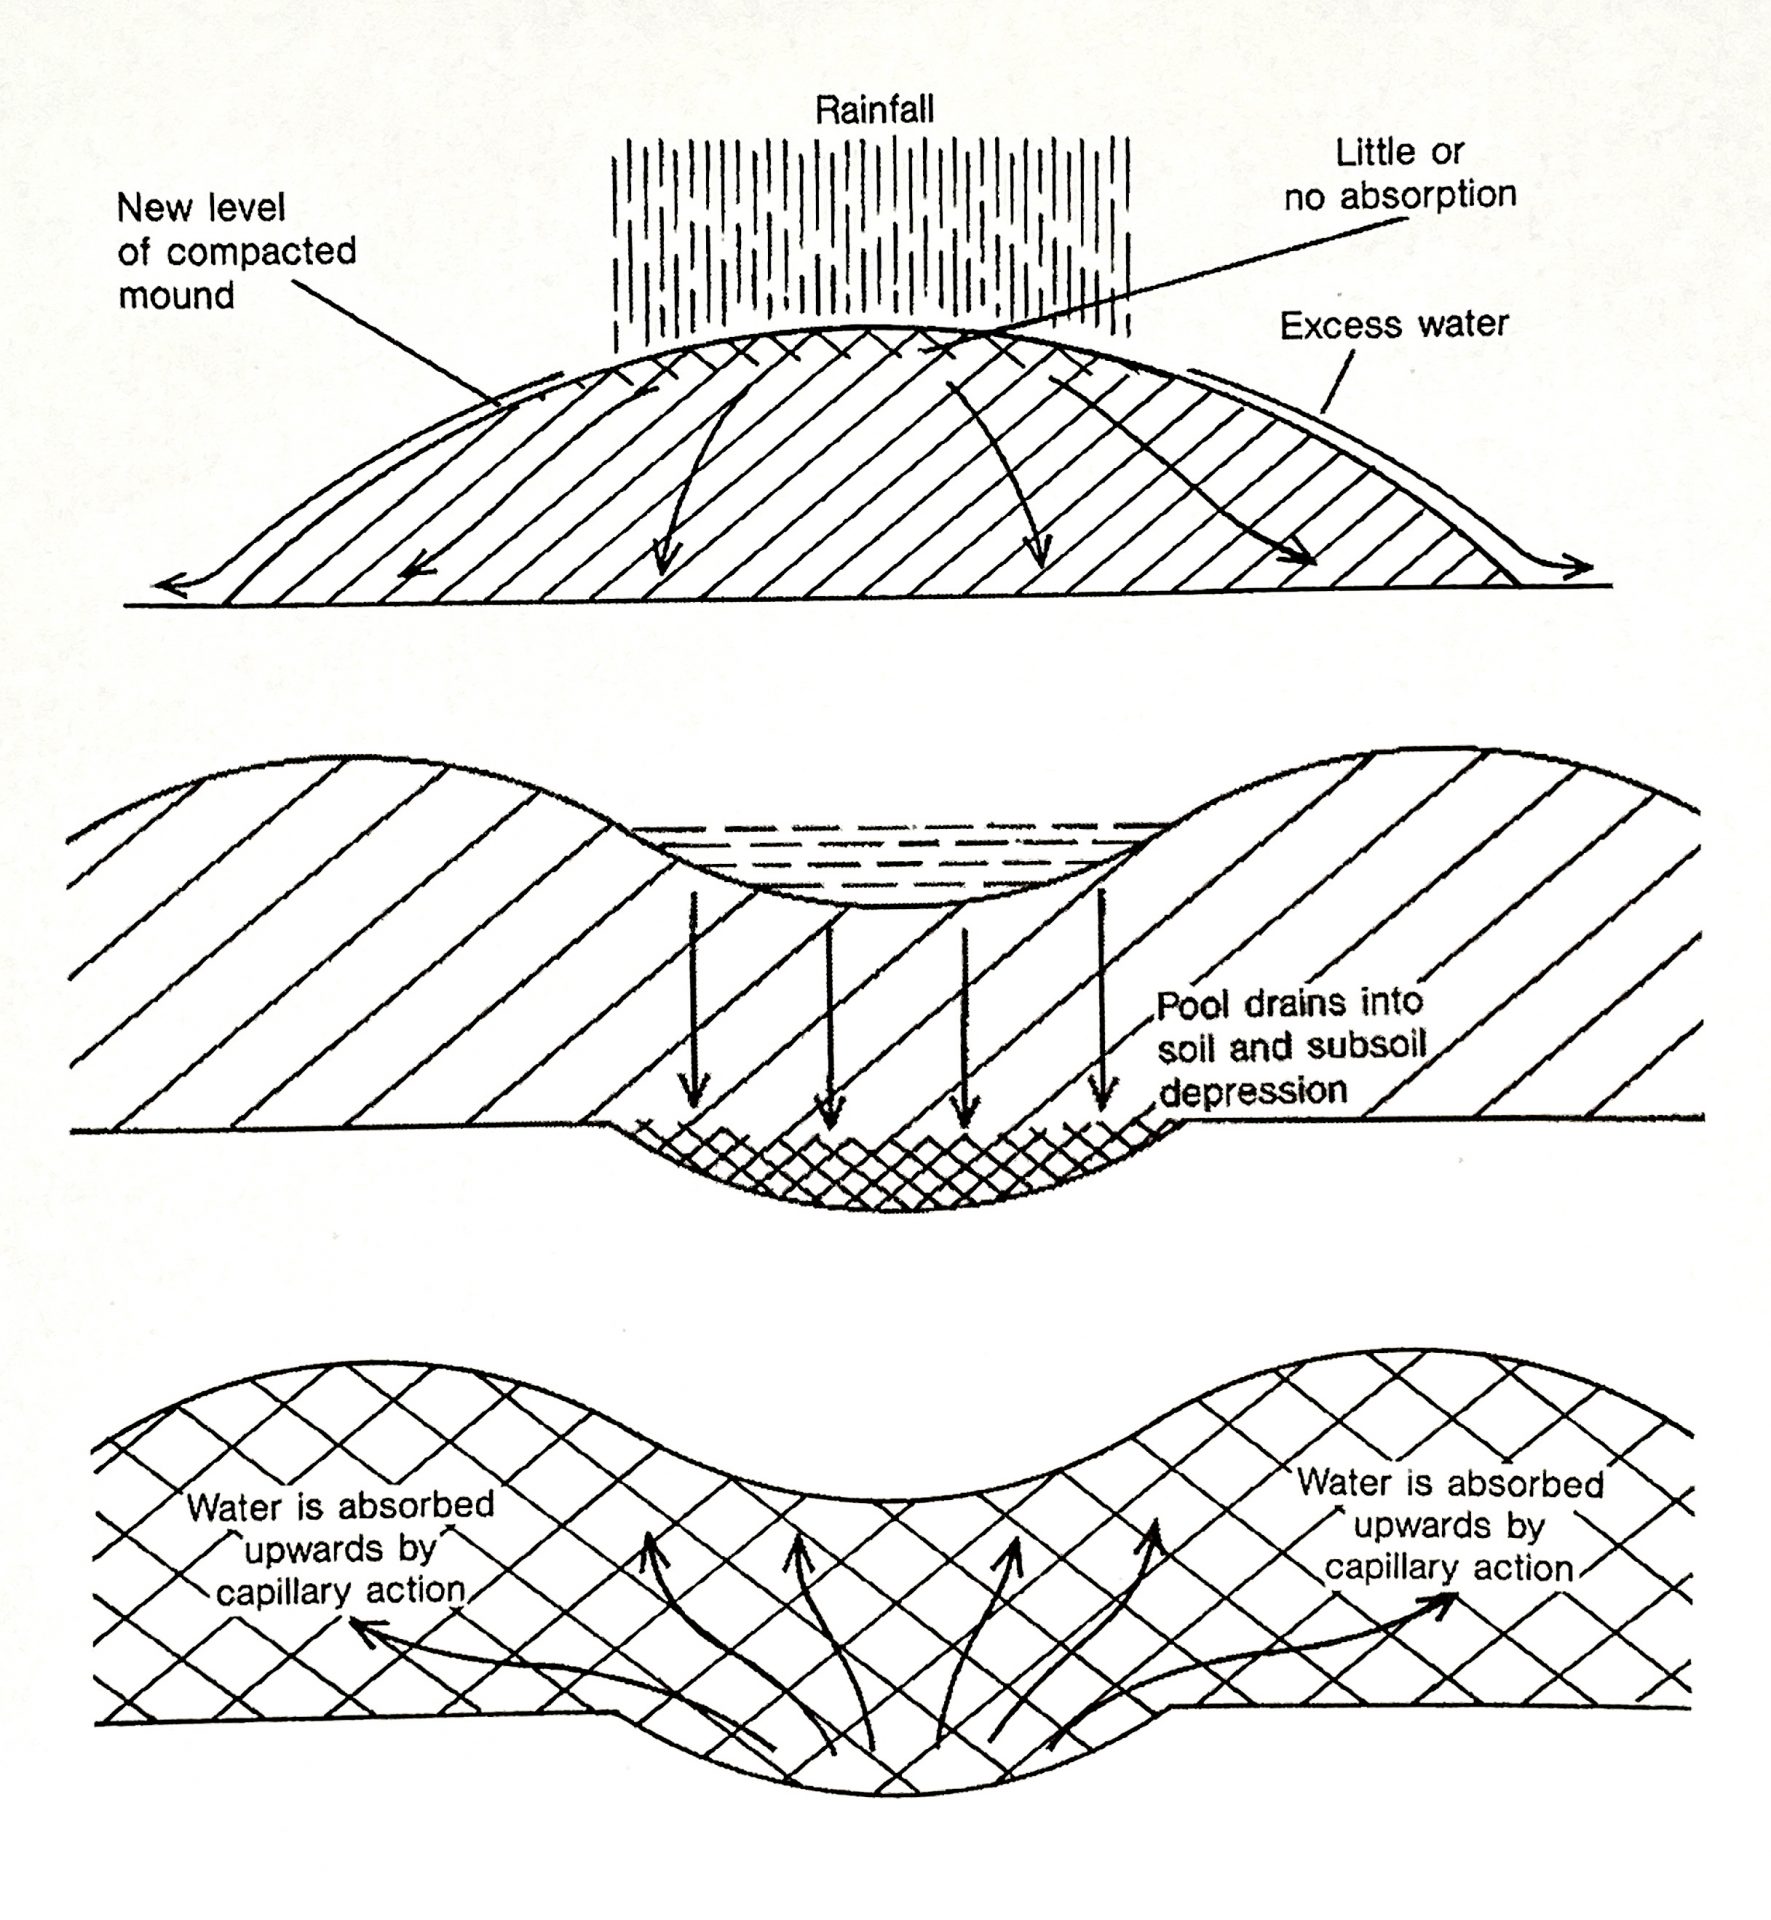 Diagrams of different mounds